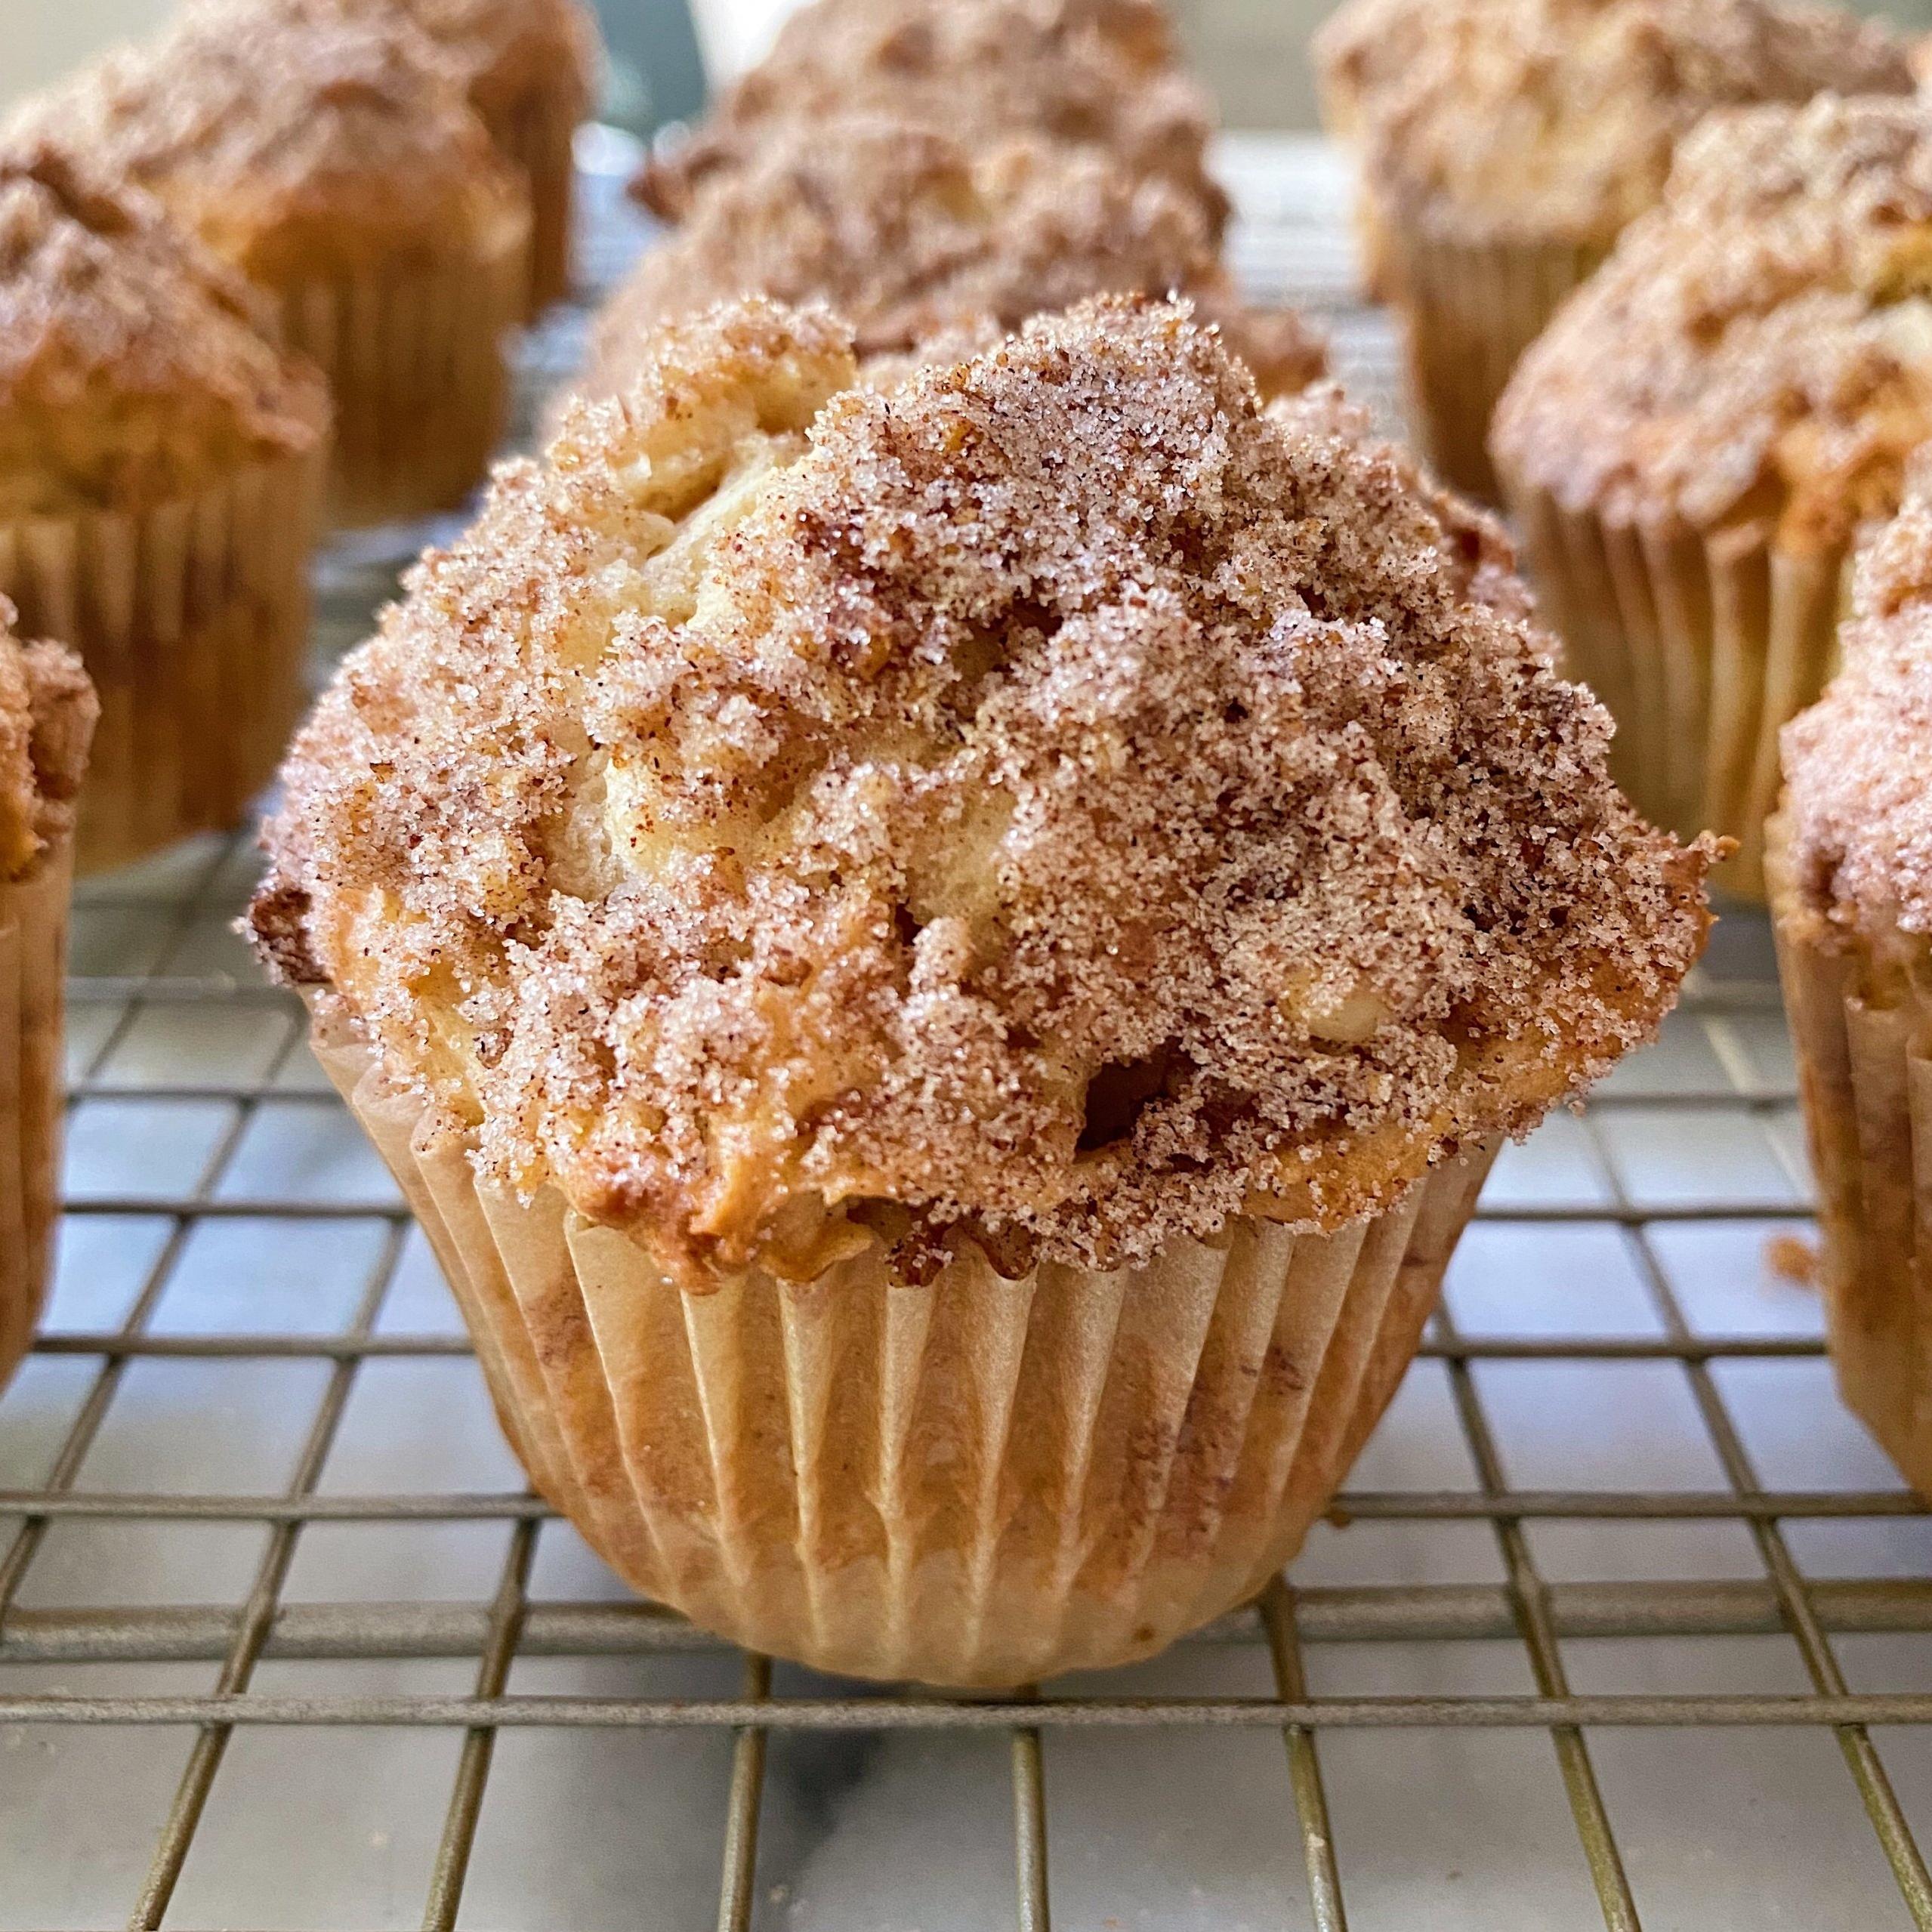  These muffins will make your house smell like a bakery